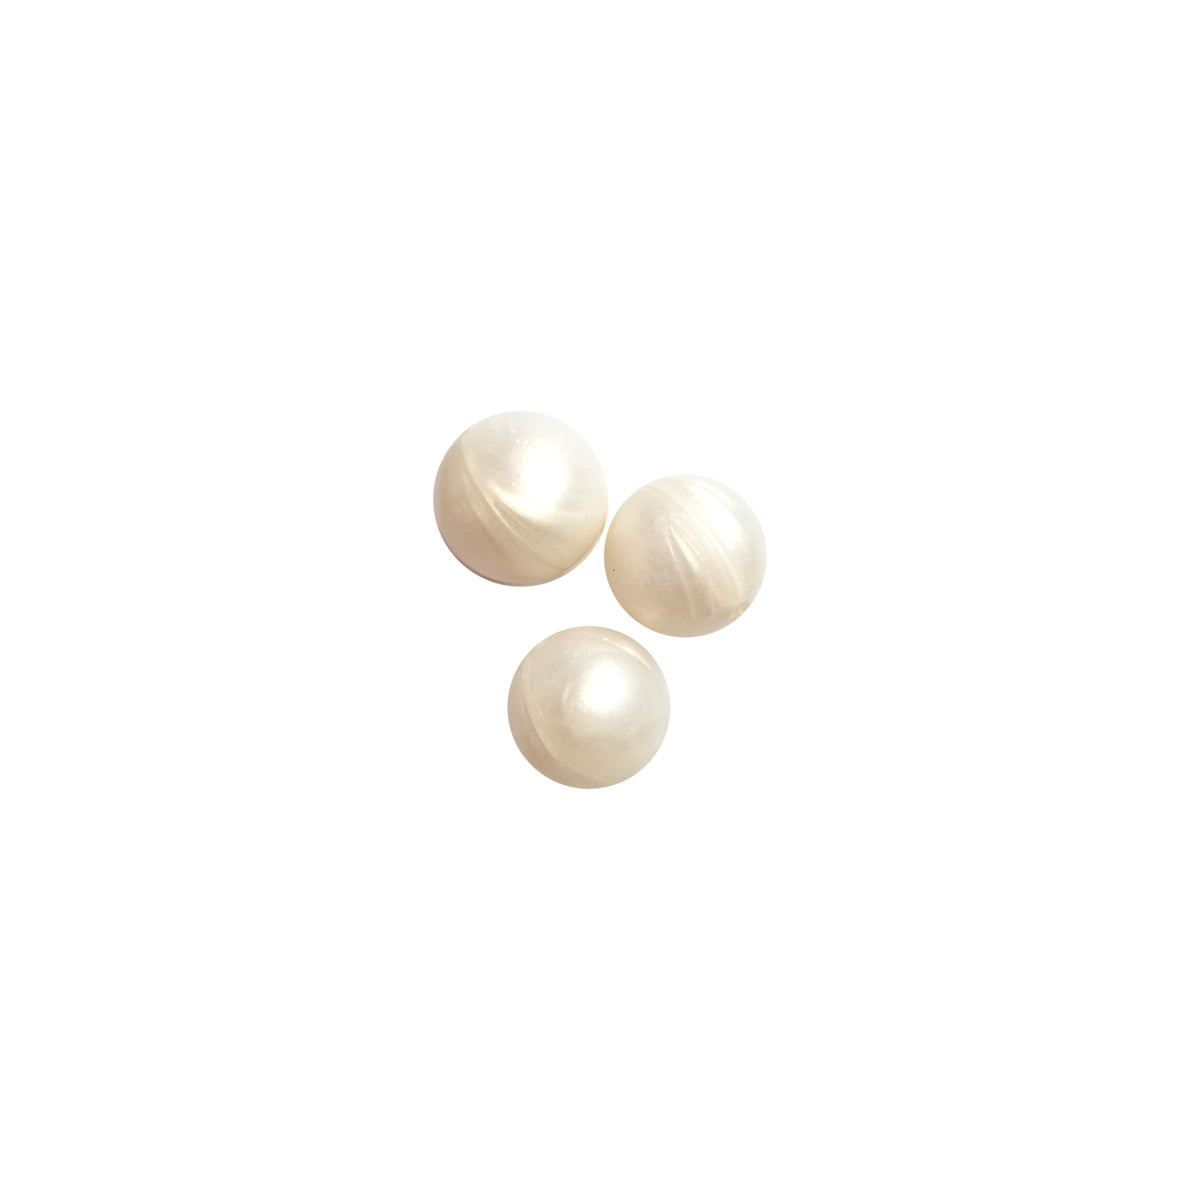 15mm pearl white round silicone beads